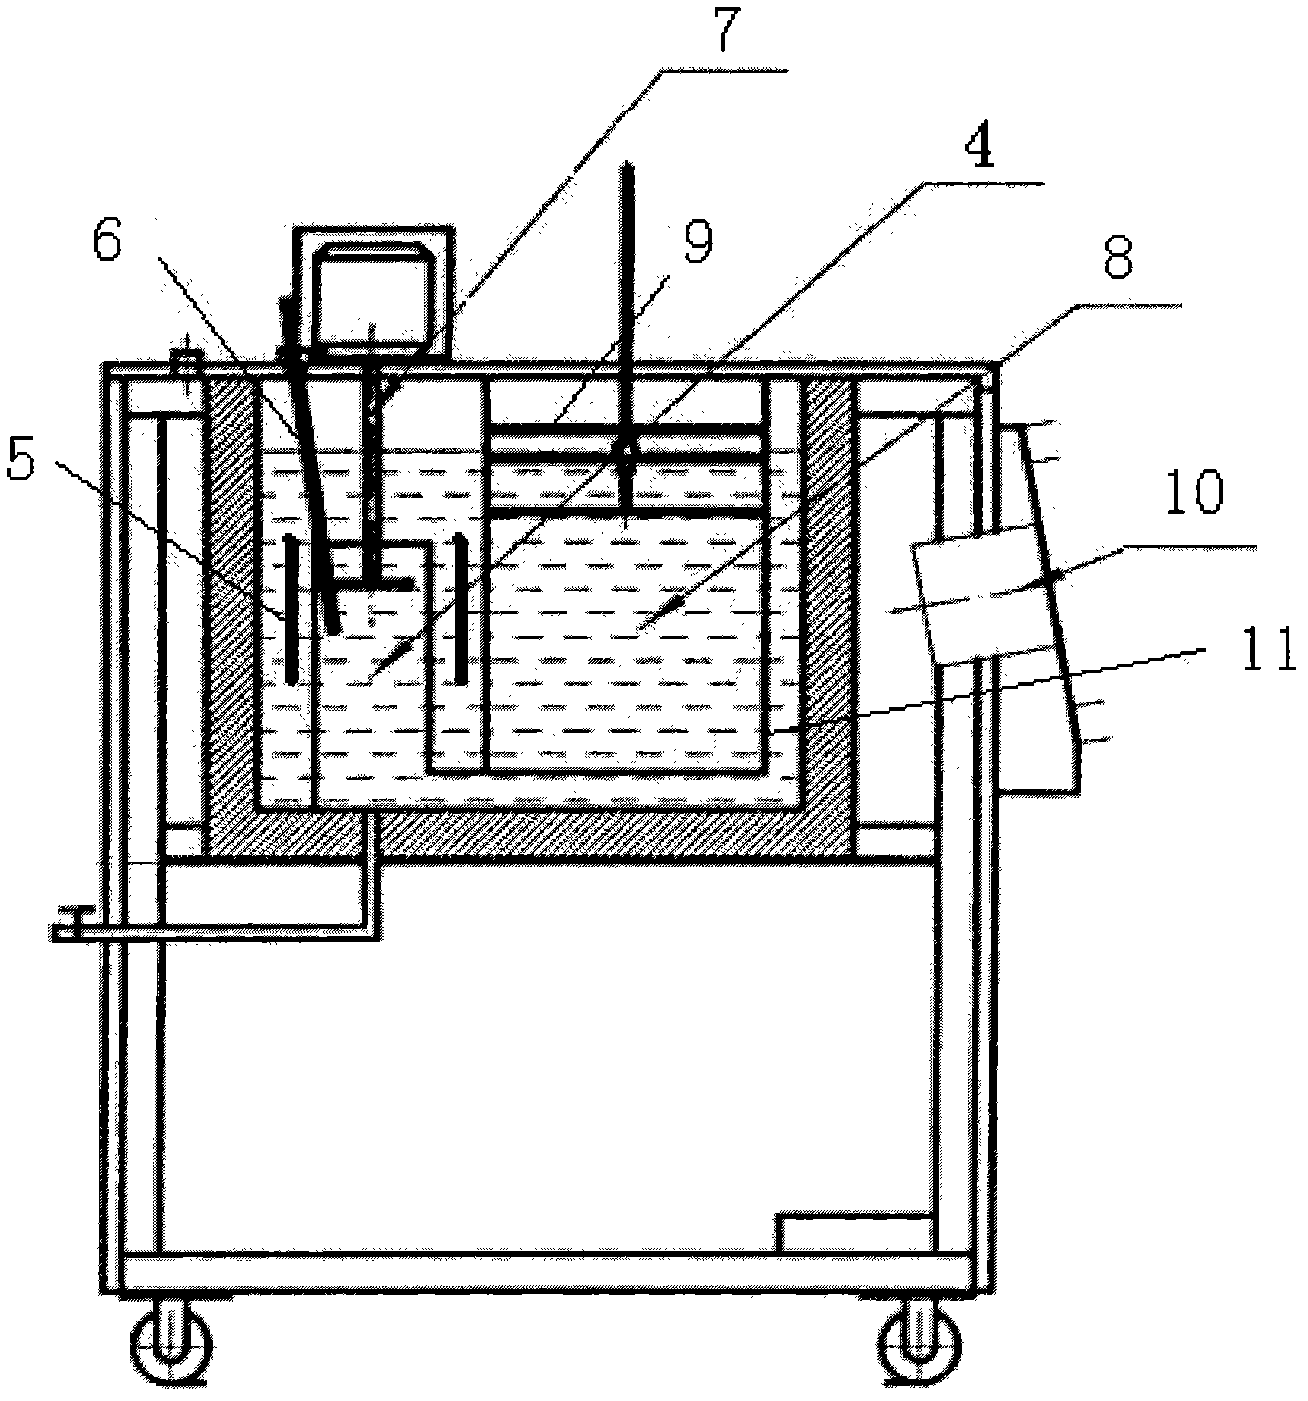 Thermostatic bath for verifying temperature sensor paired with calorimeter